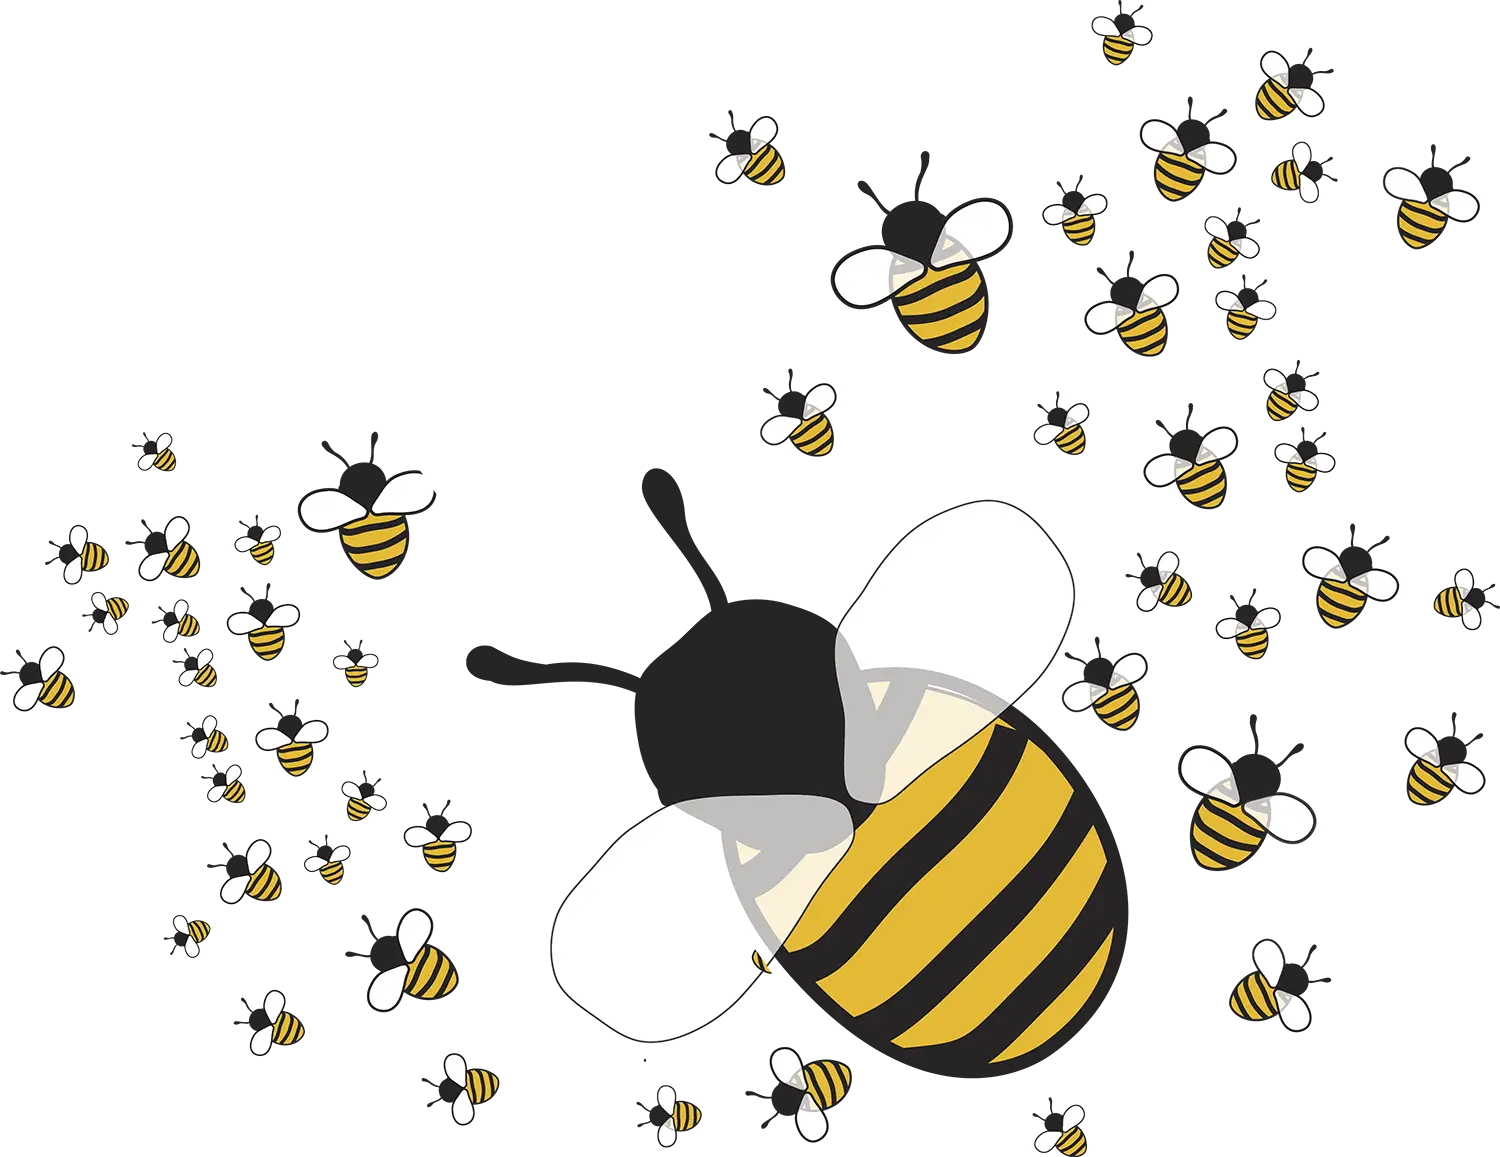 Illustration of bees